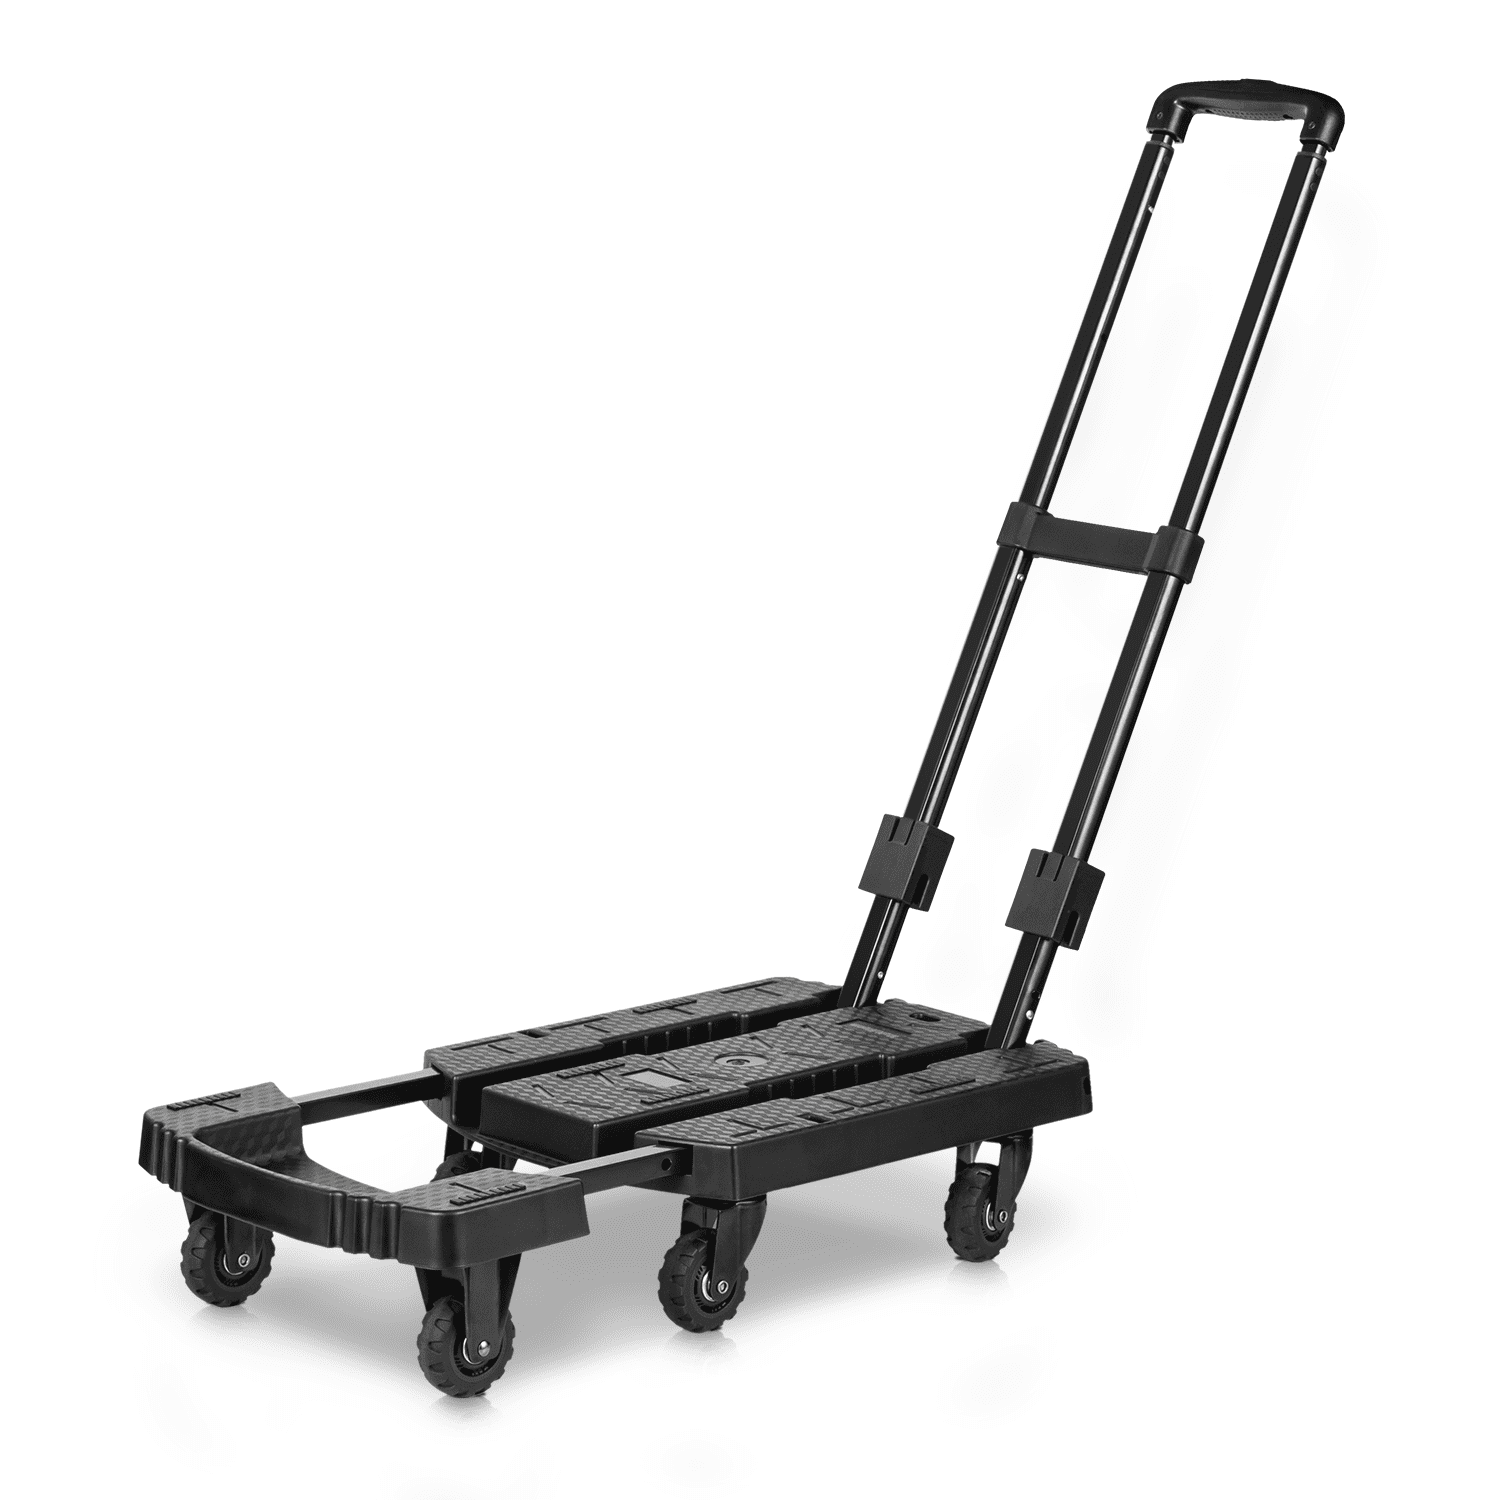 Light Weight Foldable Dolly Waygo Aluminum Folding Hand Truck Folding Cart with Wheels for Cargo and Shopping 